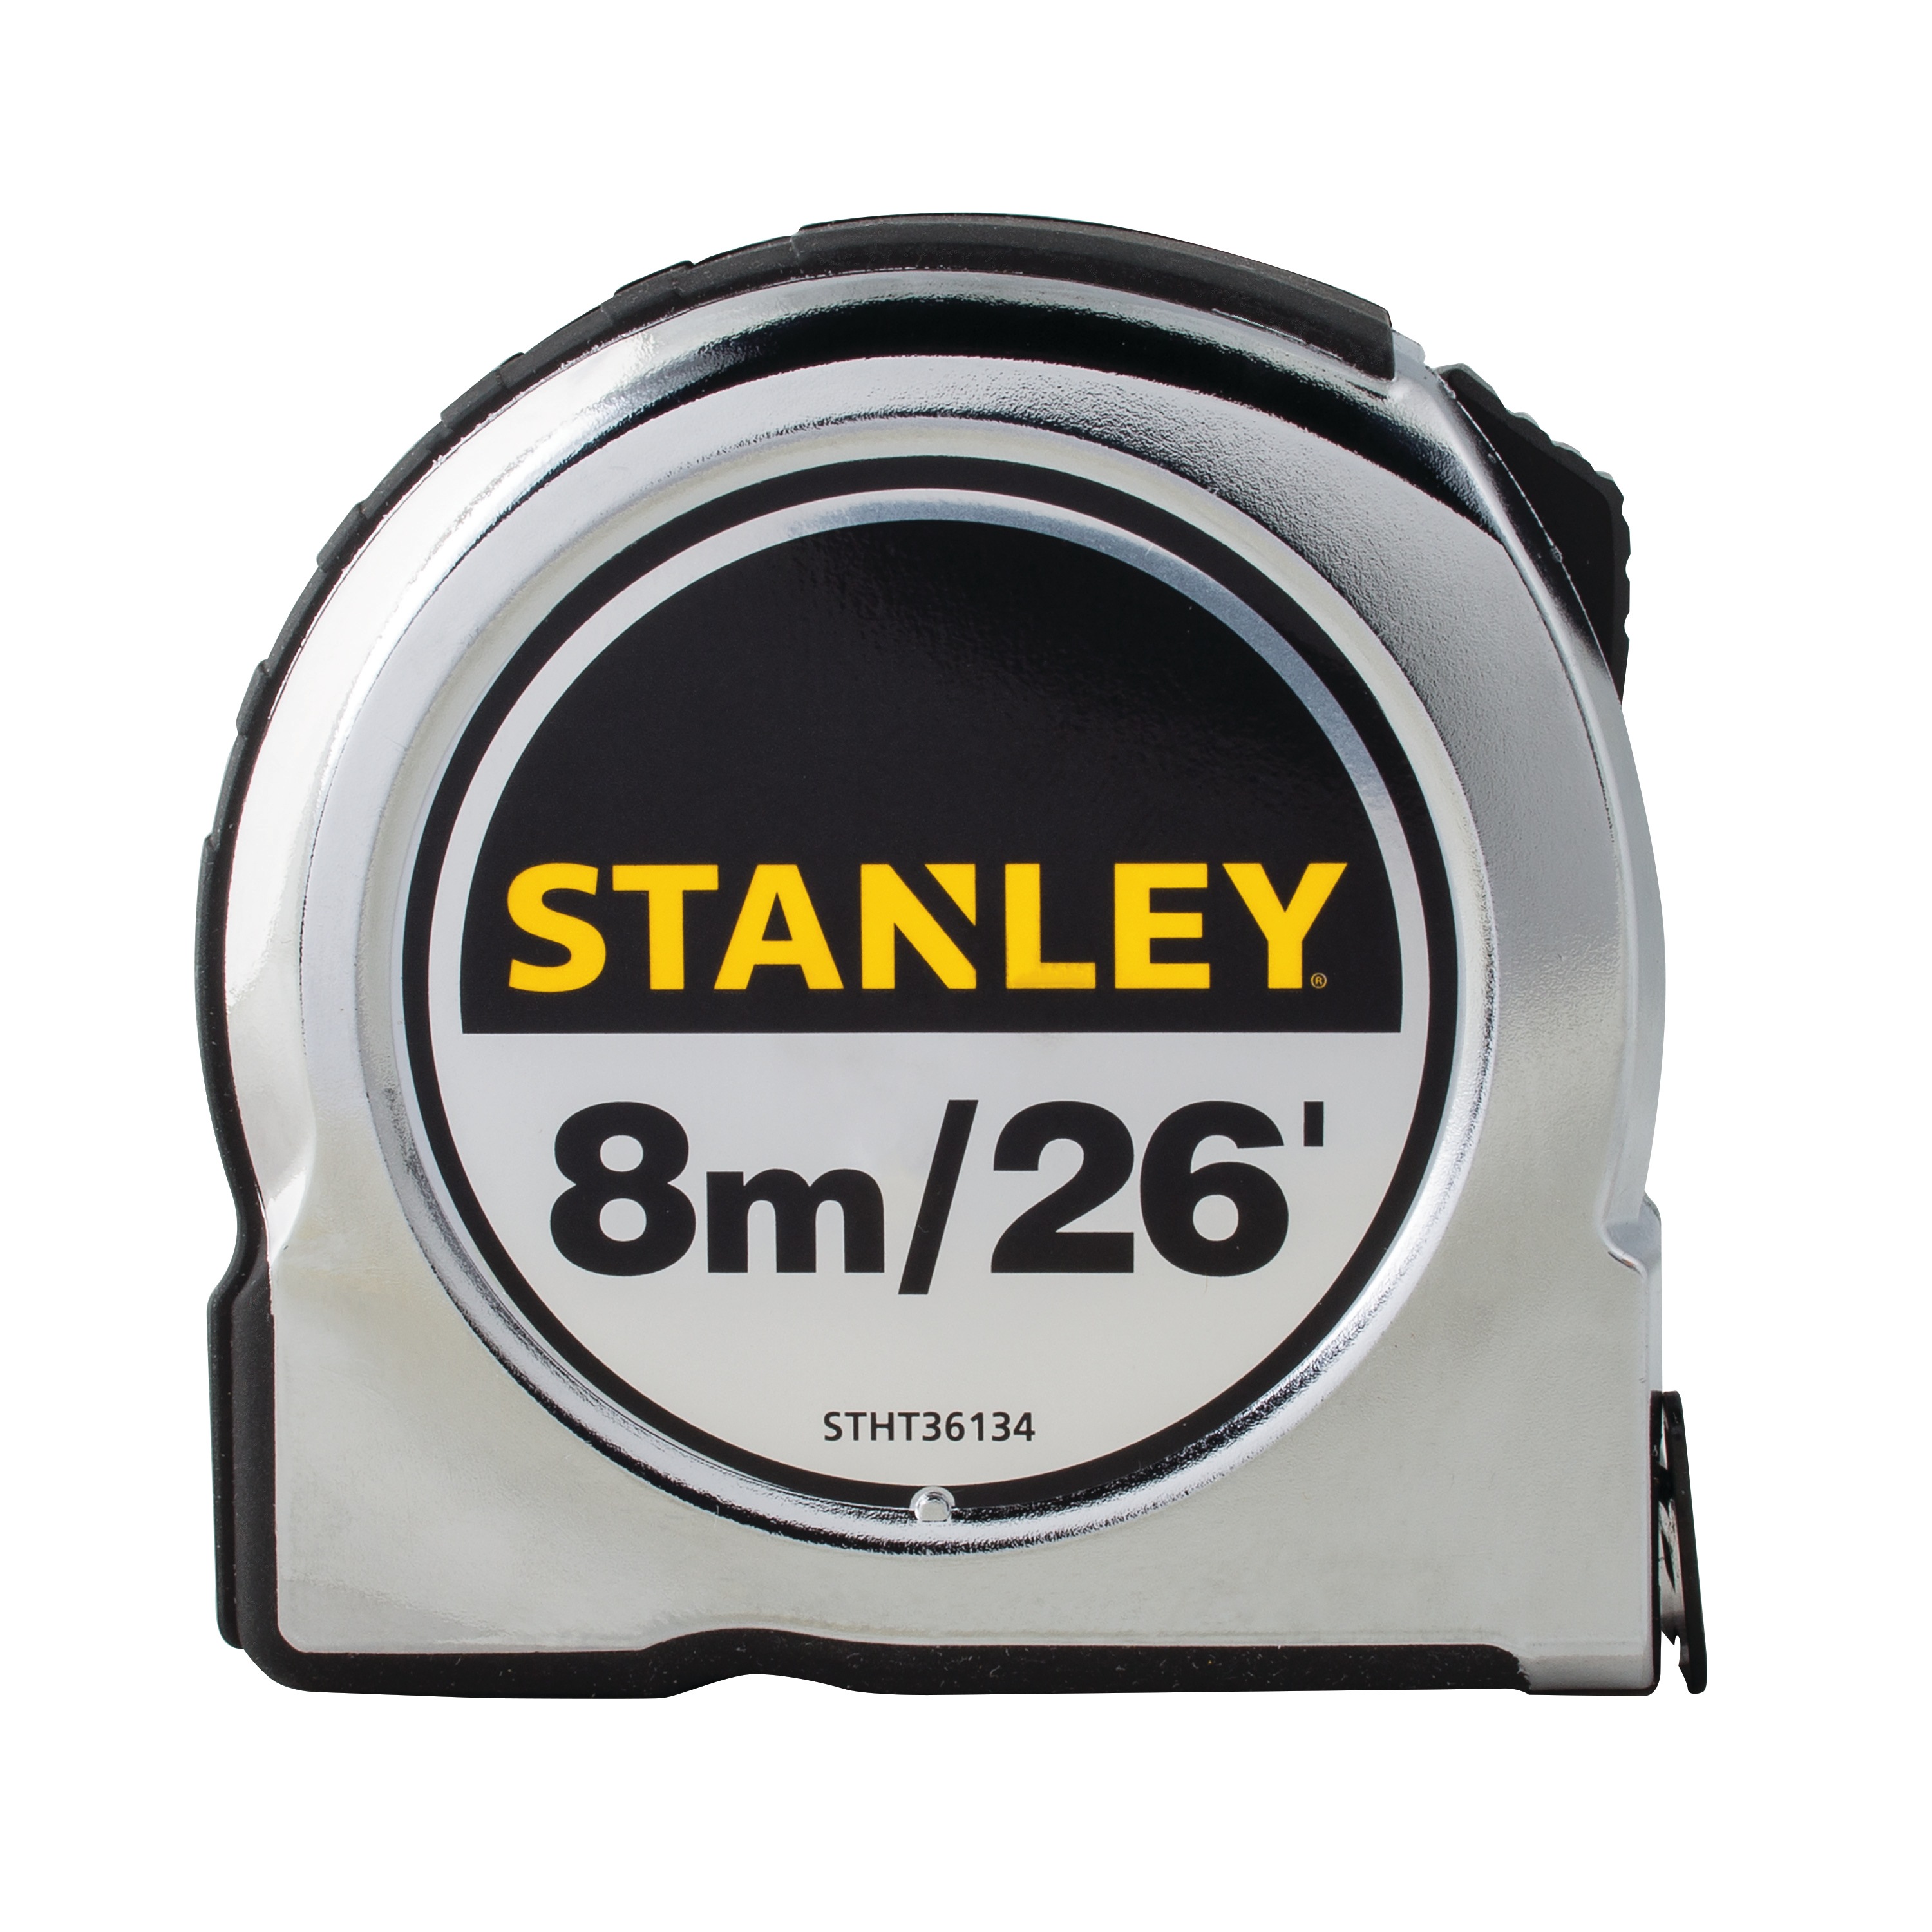 Stanley Tools - 8m26 ft Chrome Tape Measure - STHT36134S